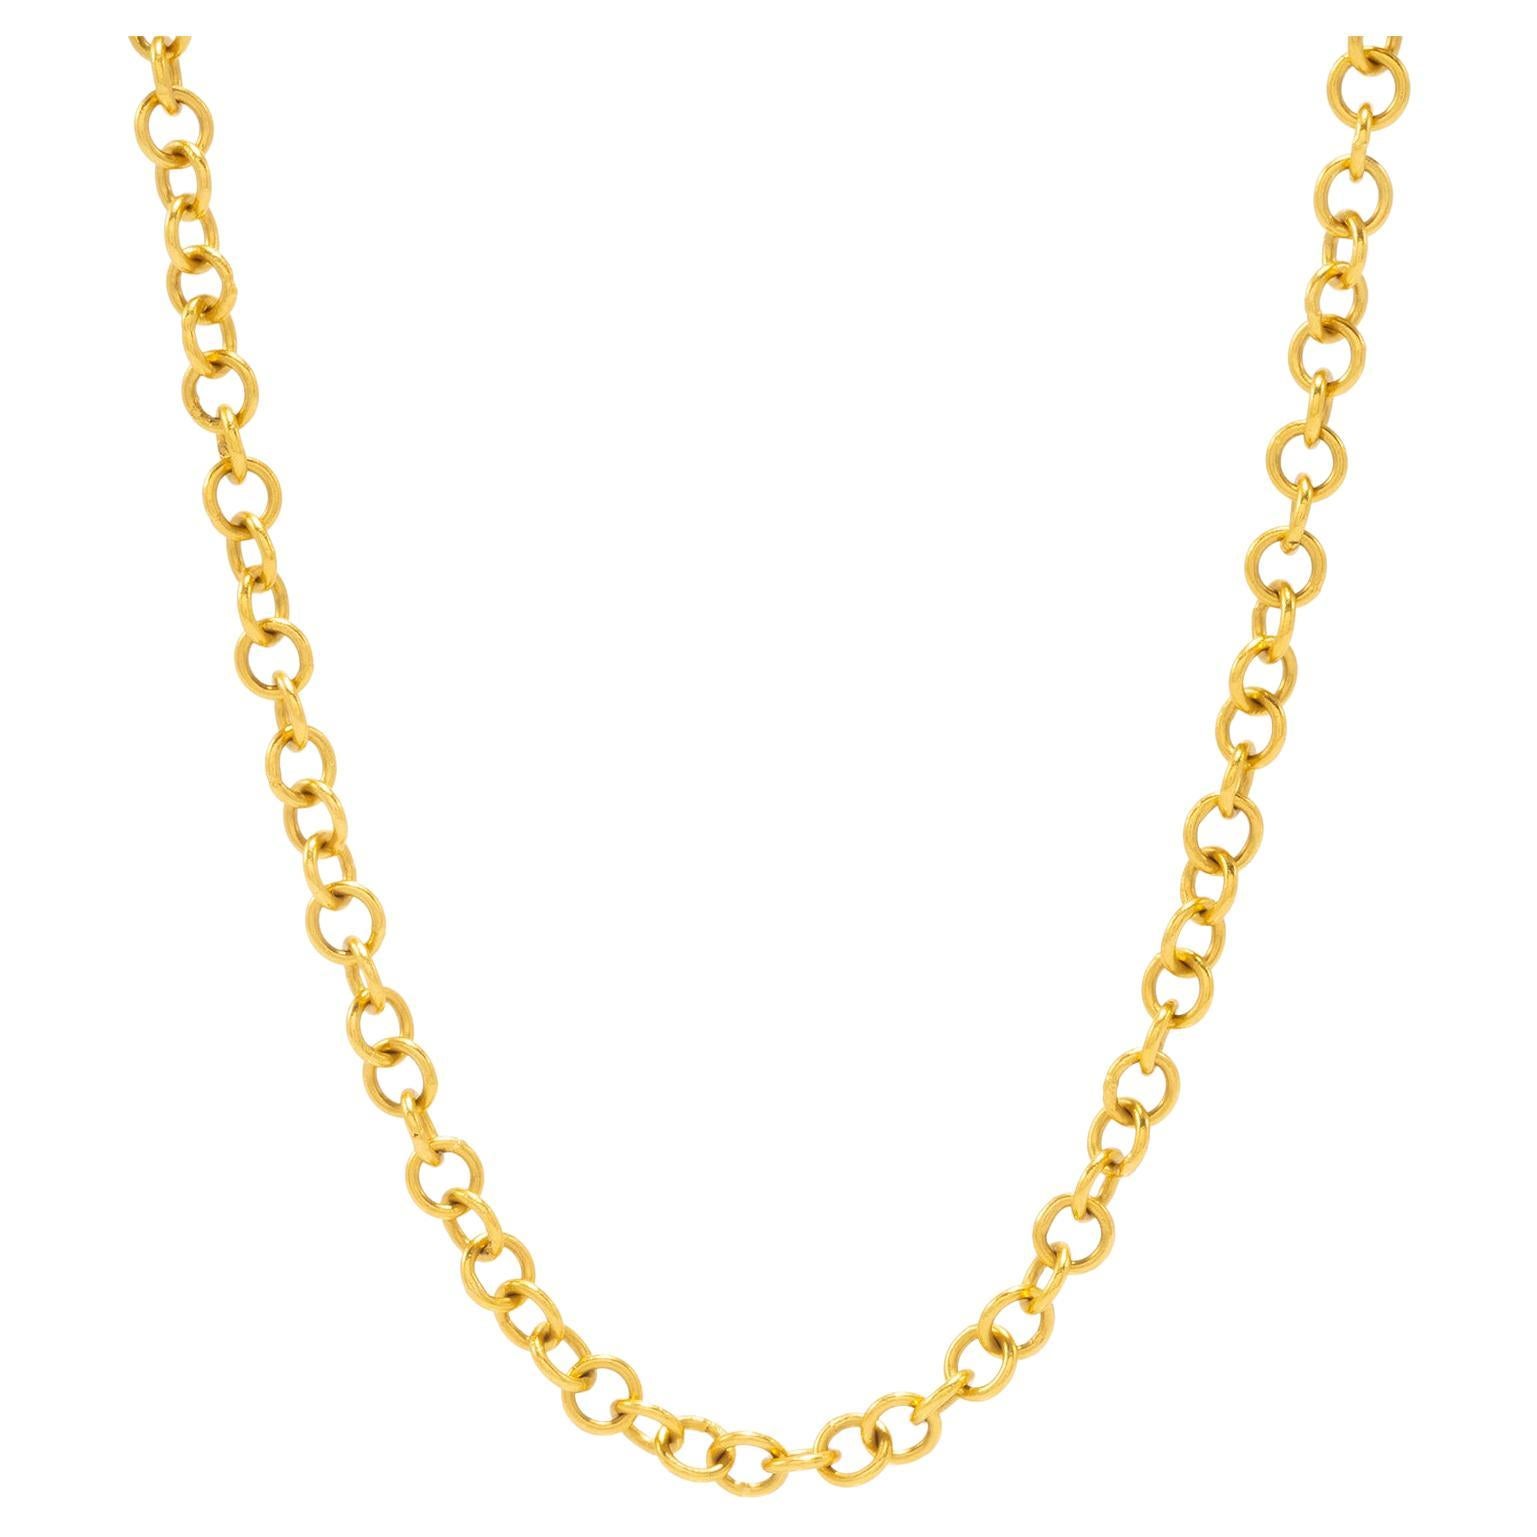 22k Gold Handmade Cable Chain 24" long, by Tagili Designs